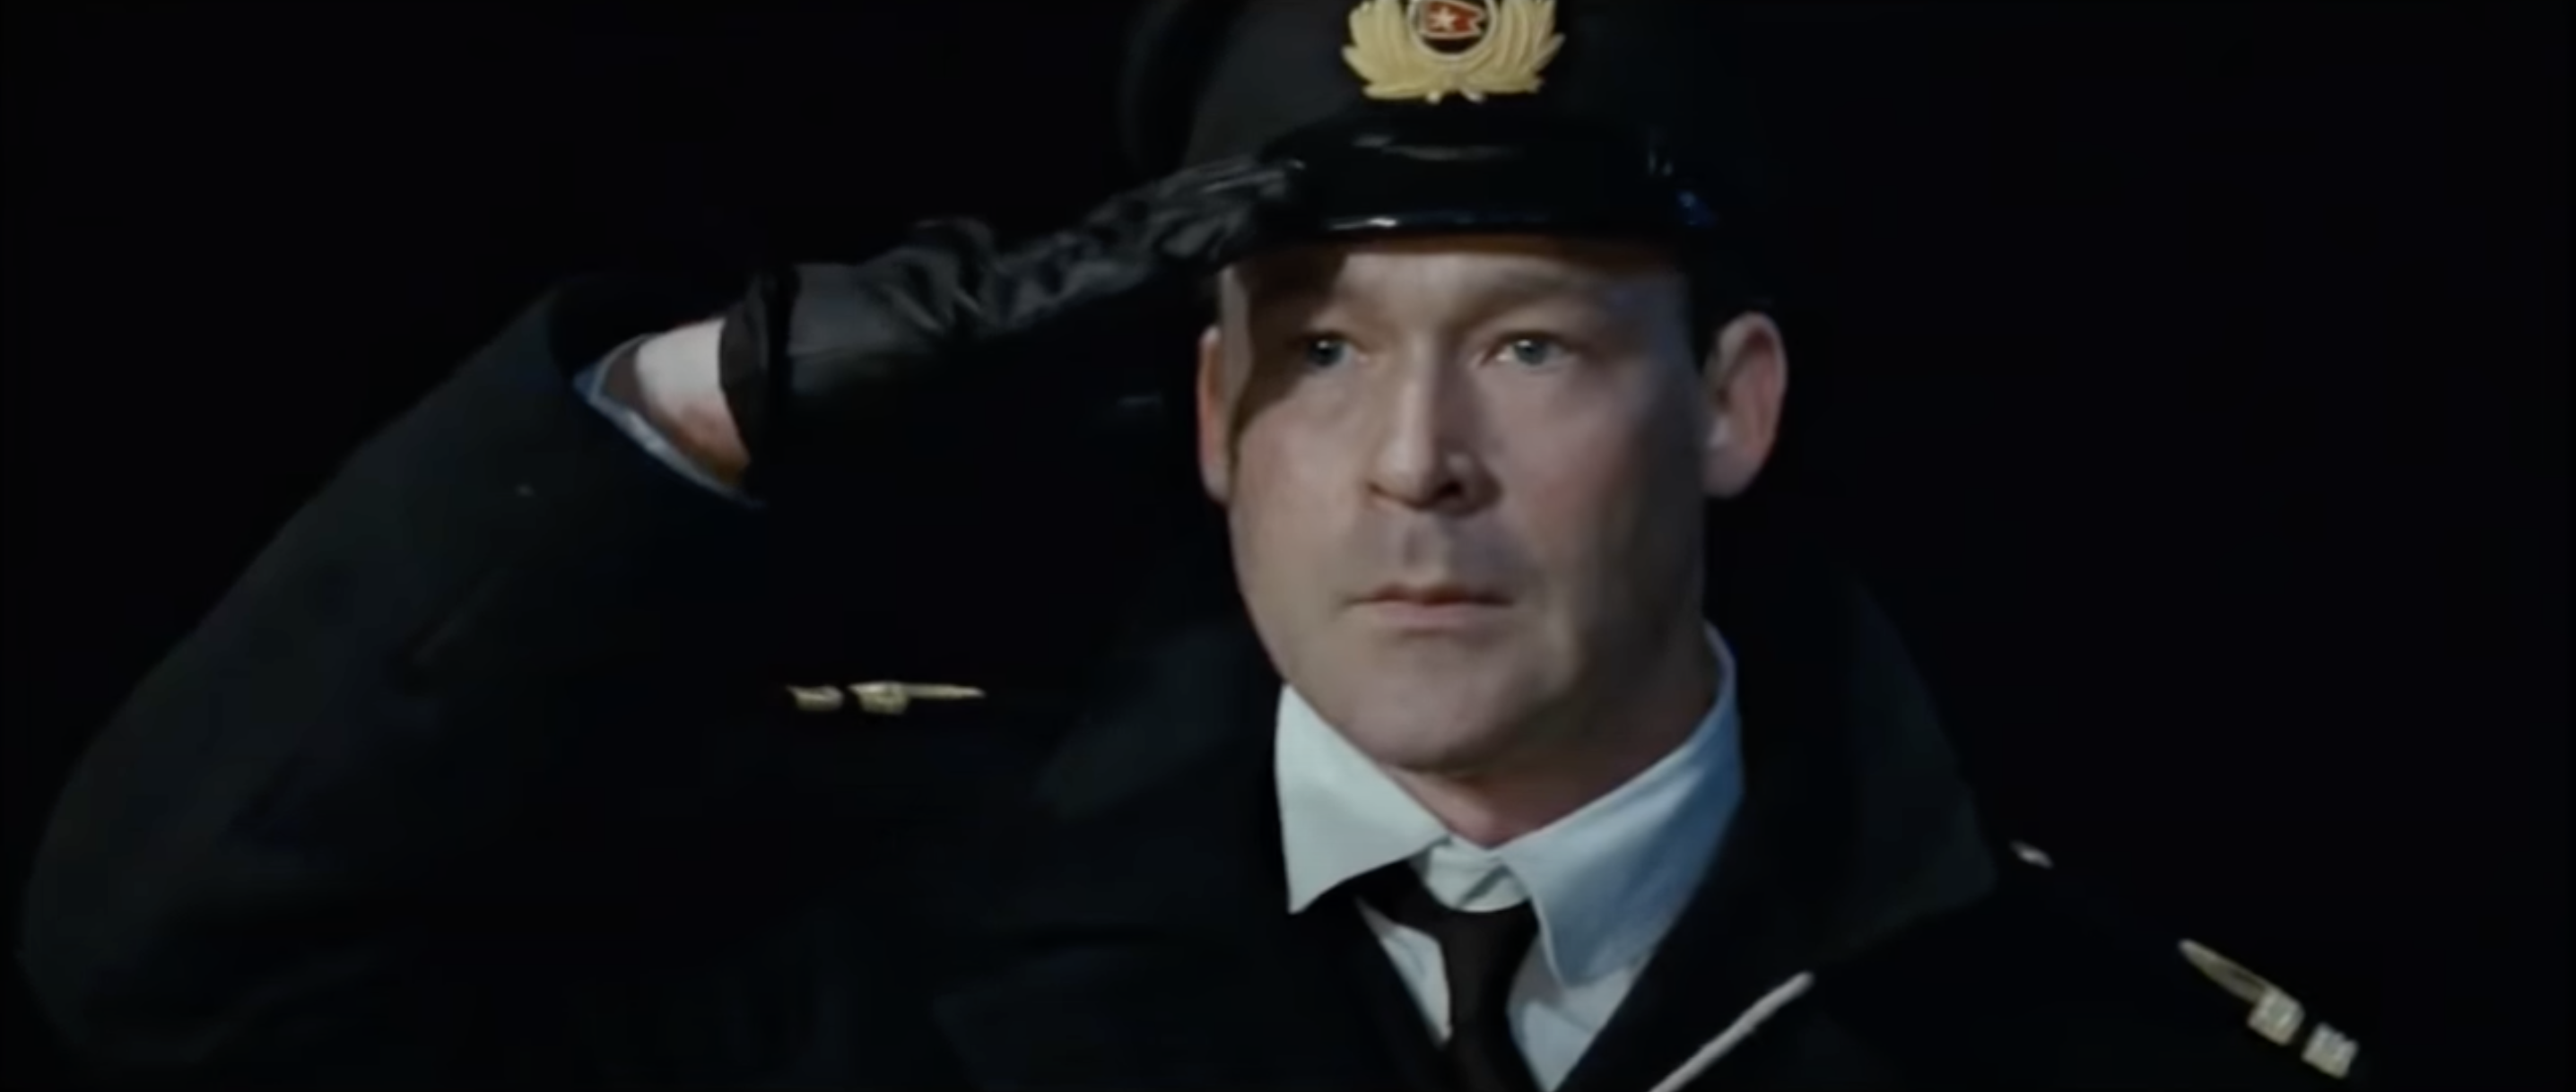 Officer Murdoch, portrayed by Ewan Stewart in the 1997 film, solutes a fellow officer who is off screen. 